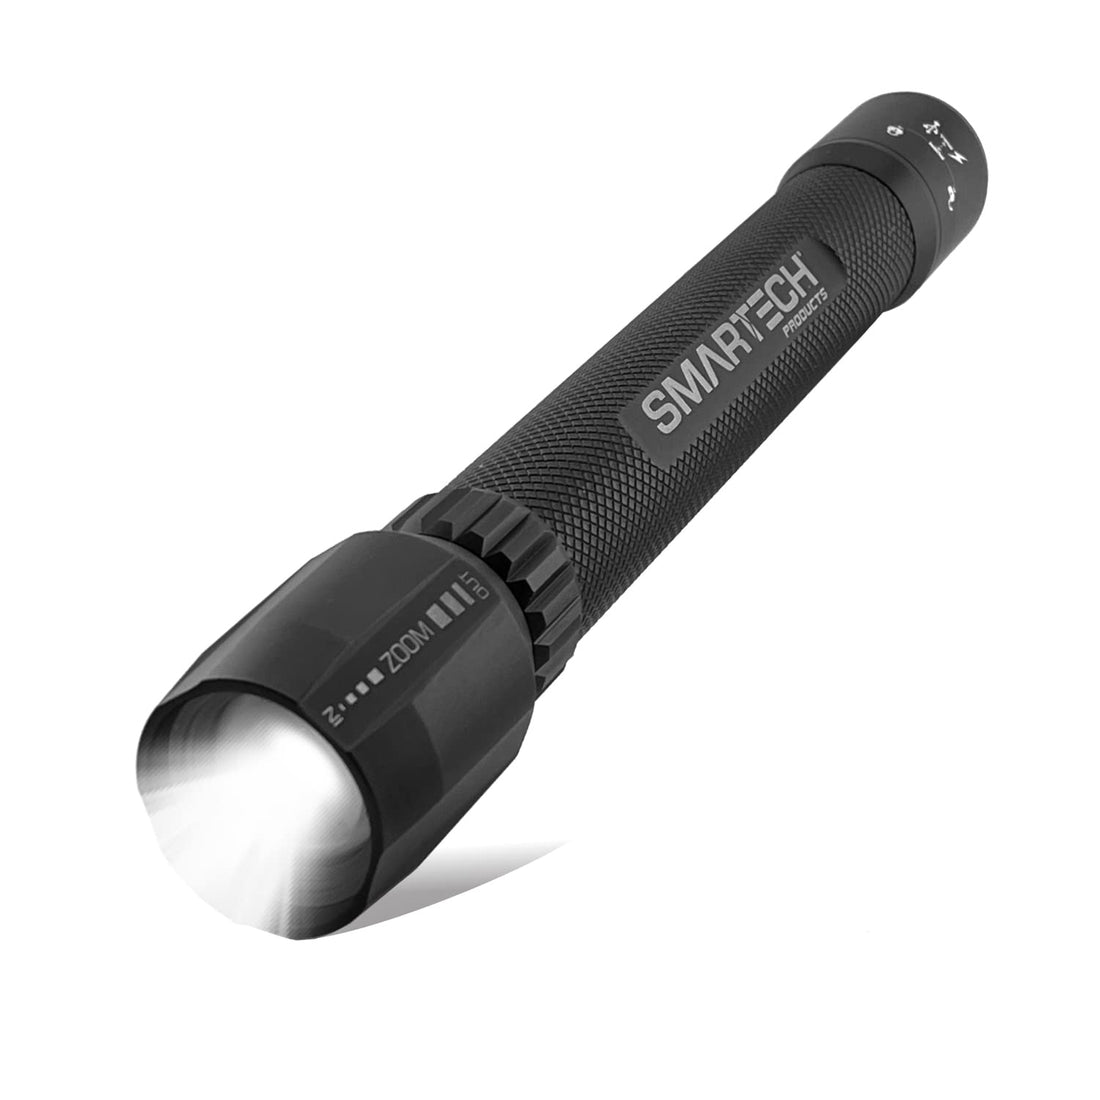 Smartech 2000 Lumen, Super Bright, Dual Power, Rechargeable, LED Tactical Flashlight, 9000mAh Power Bank, Zoom in Zoom Out, 5 Modes, Indestructible, Waterproof, Shockproof, Ultra Light Pocket Sized